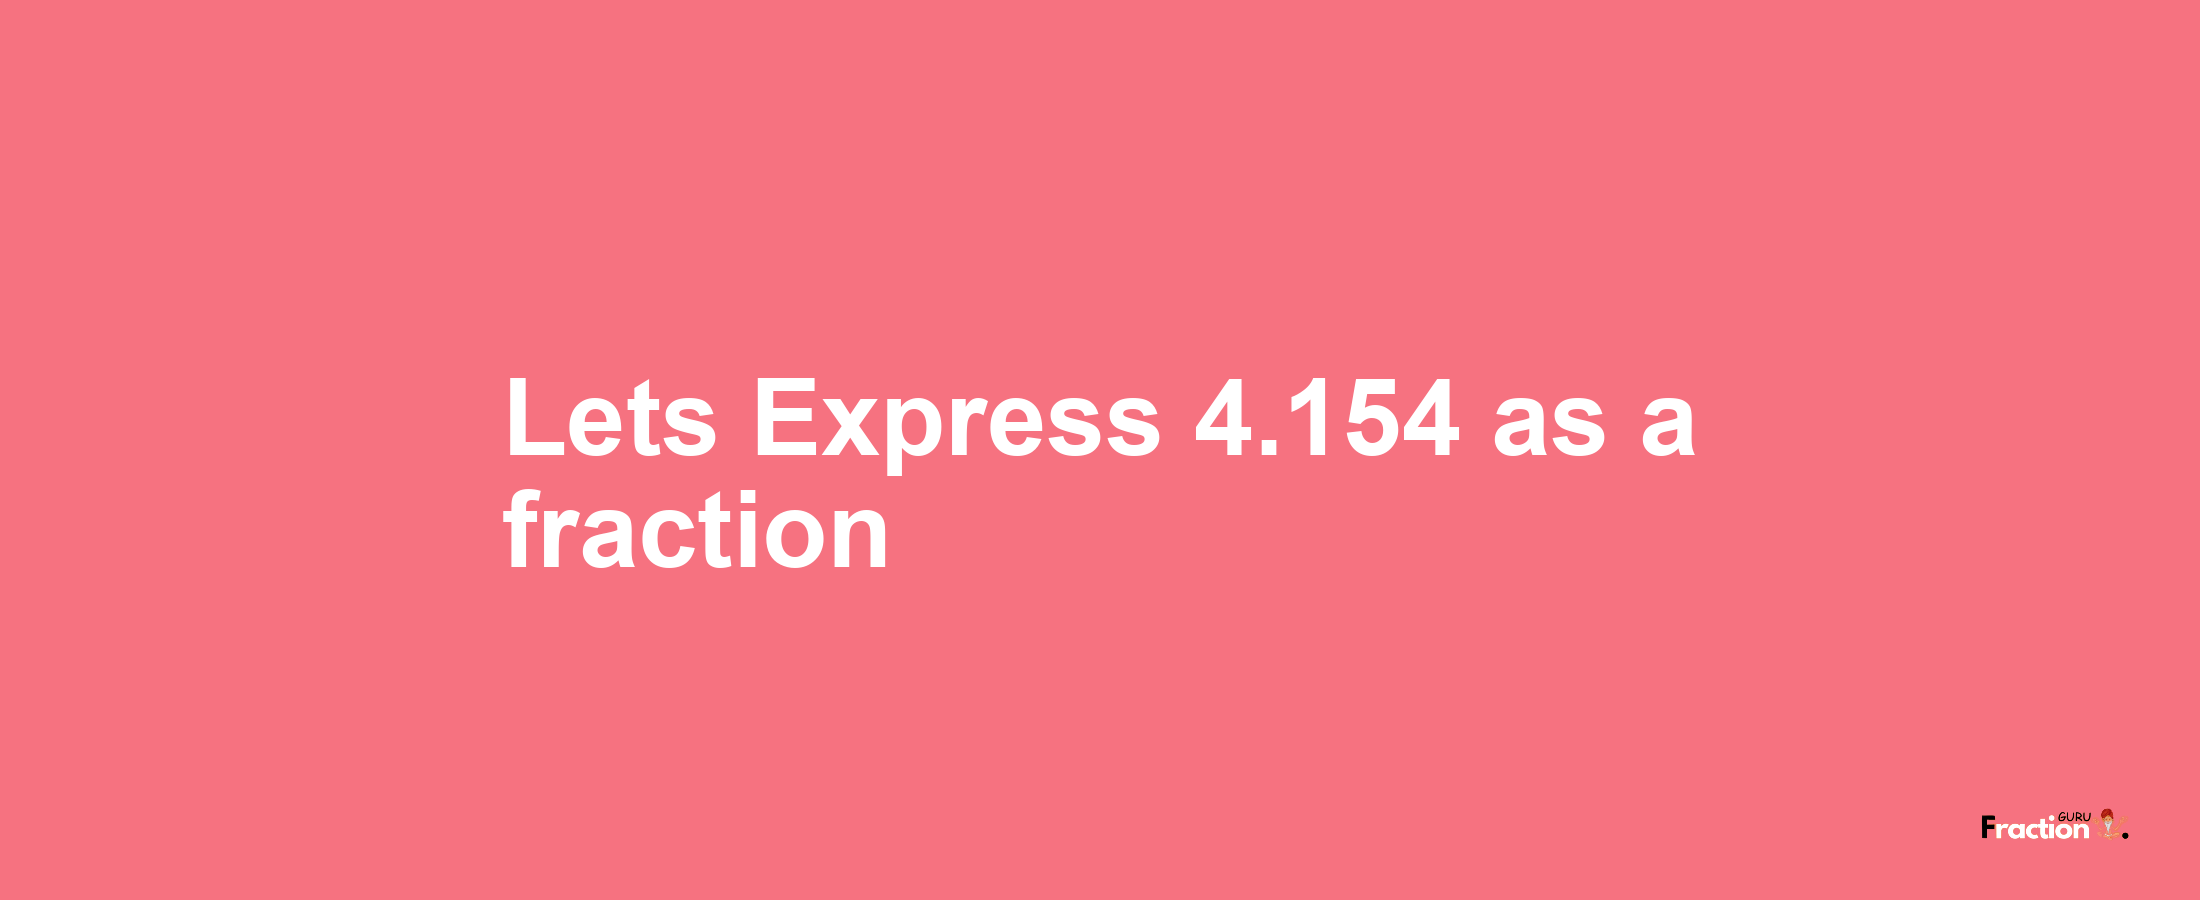 Lets Express 4.154 as afraction